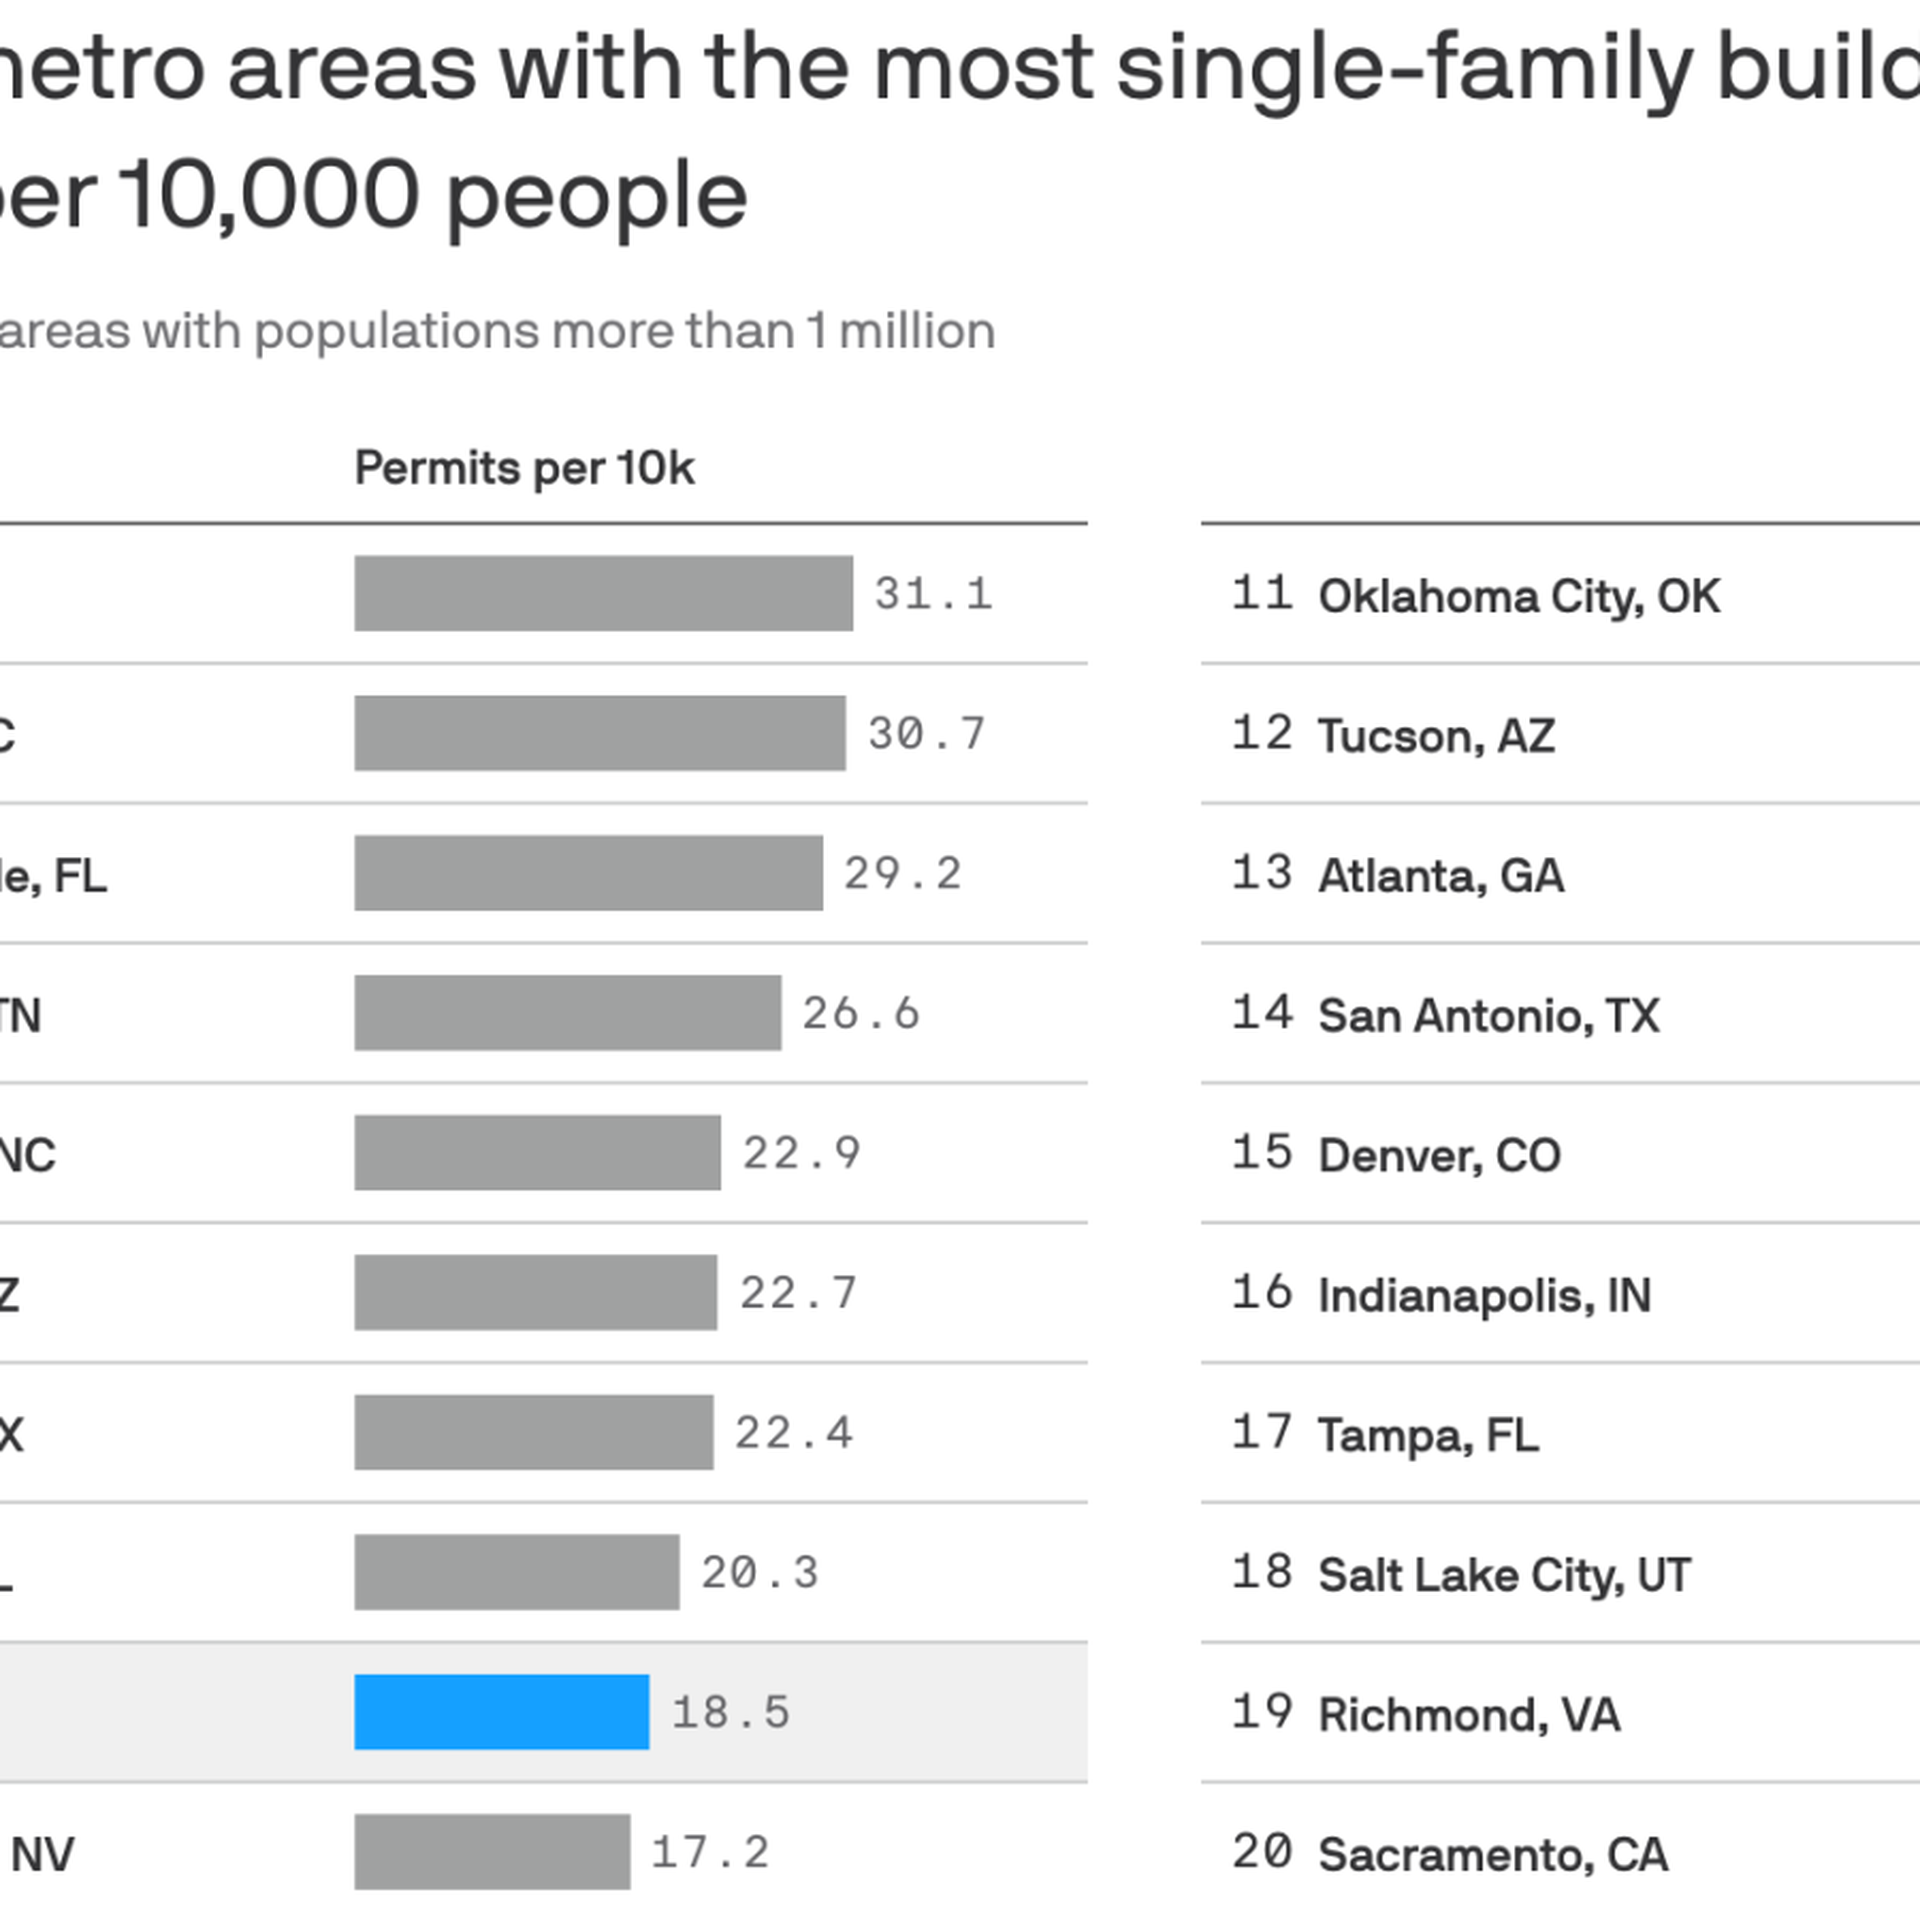 Building more homes is one way to ease the affordability crisis.